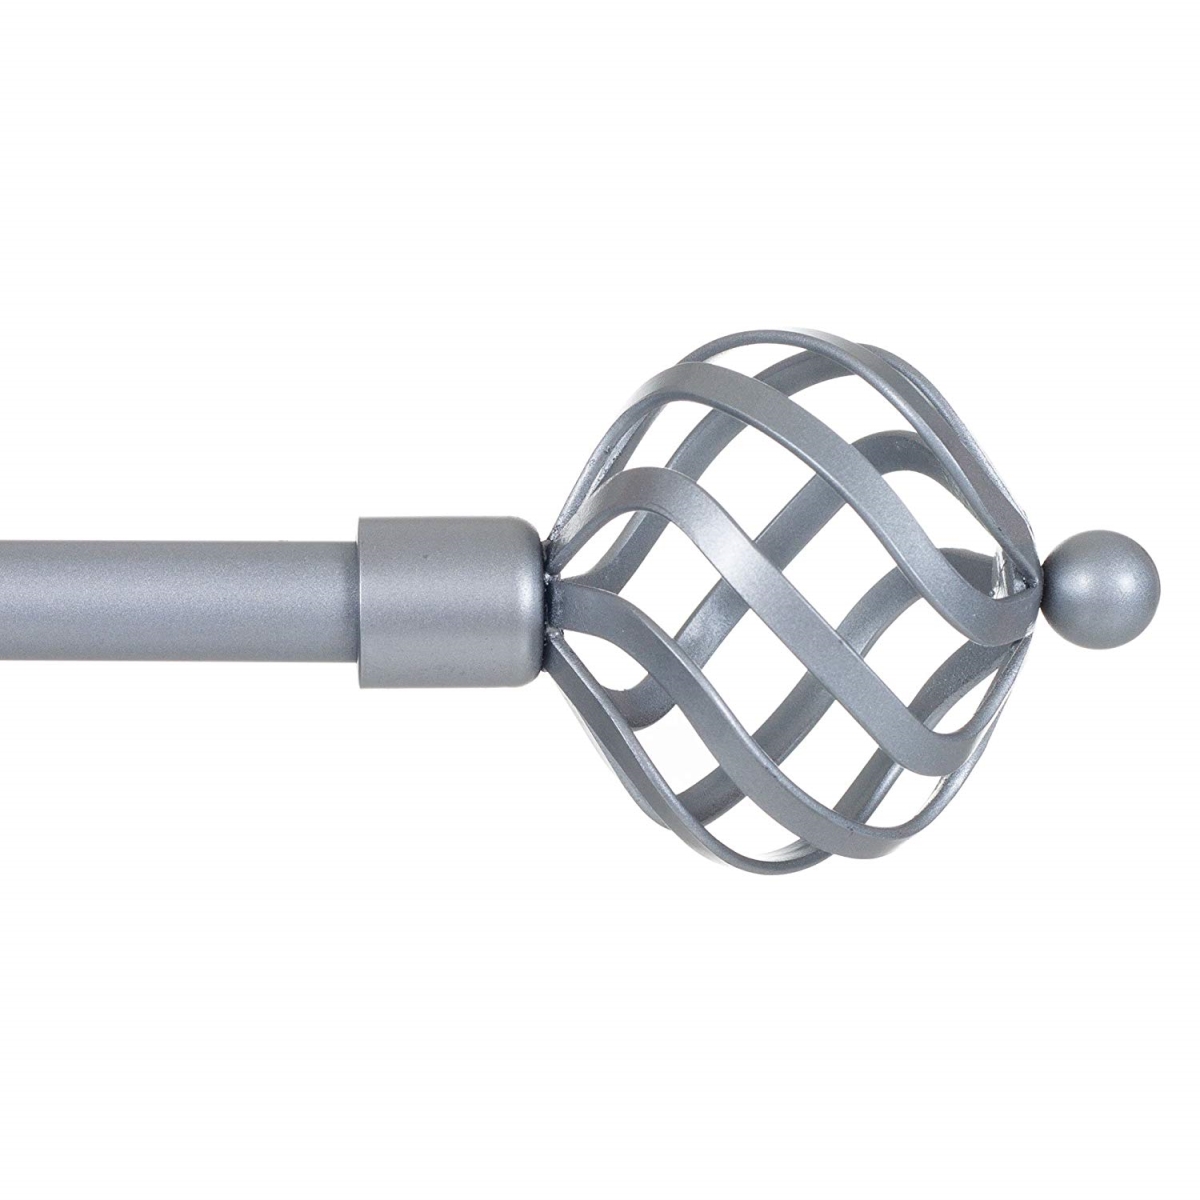 63a-02739 Twisted Sphere Curtain Rod, Silver - 62-144 In., 0.75 In.